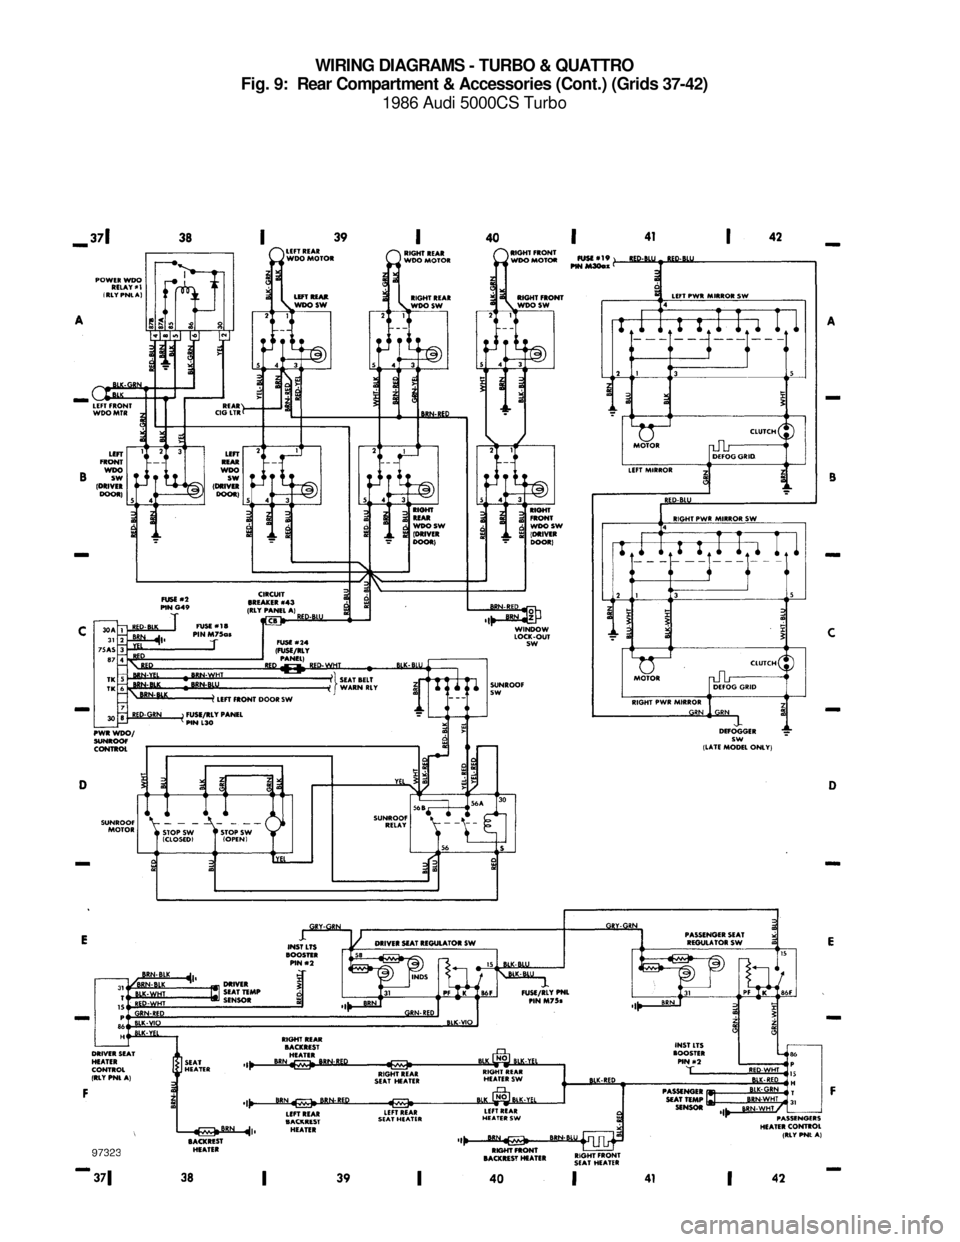 AUDI 5000CS 1986 C2 System Wiring Diagram WIRING DIAGRAMS - TURBO & QUATTRO
Fig. 9:  Rear Compartment & Accessories (Cont.) (Grids 37-42)
1986 Audi 5000CS Turbo
For x    
Copyright © 1998 Mitchell Repair Information Company, LLCMonday, July 